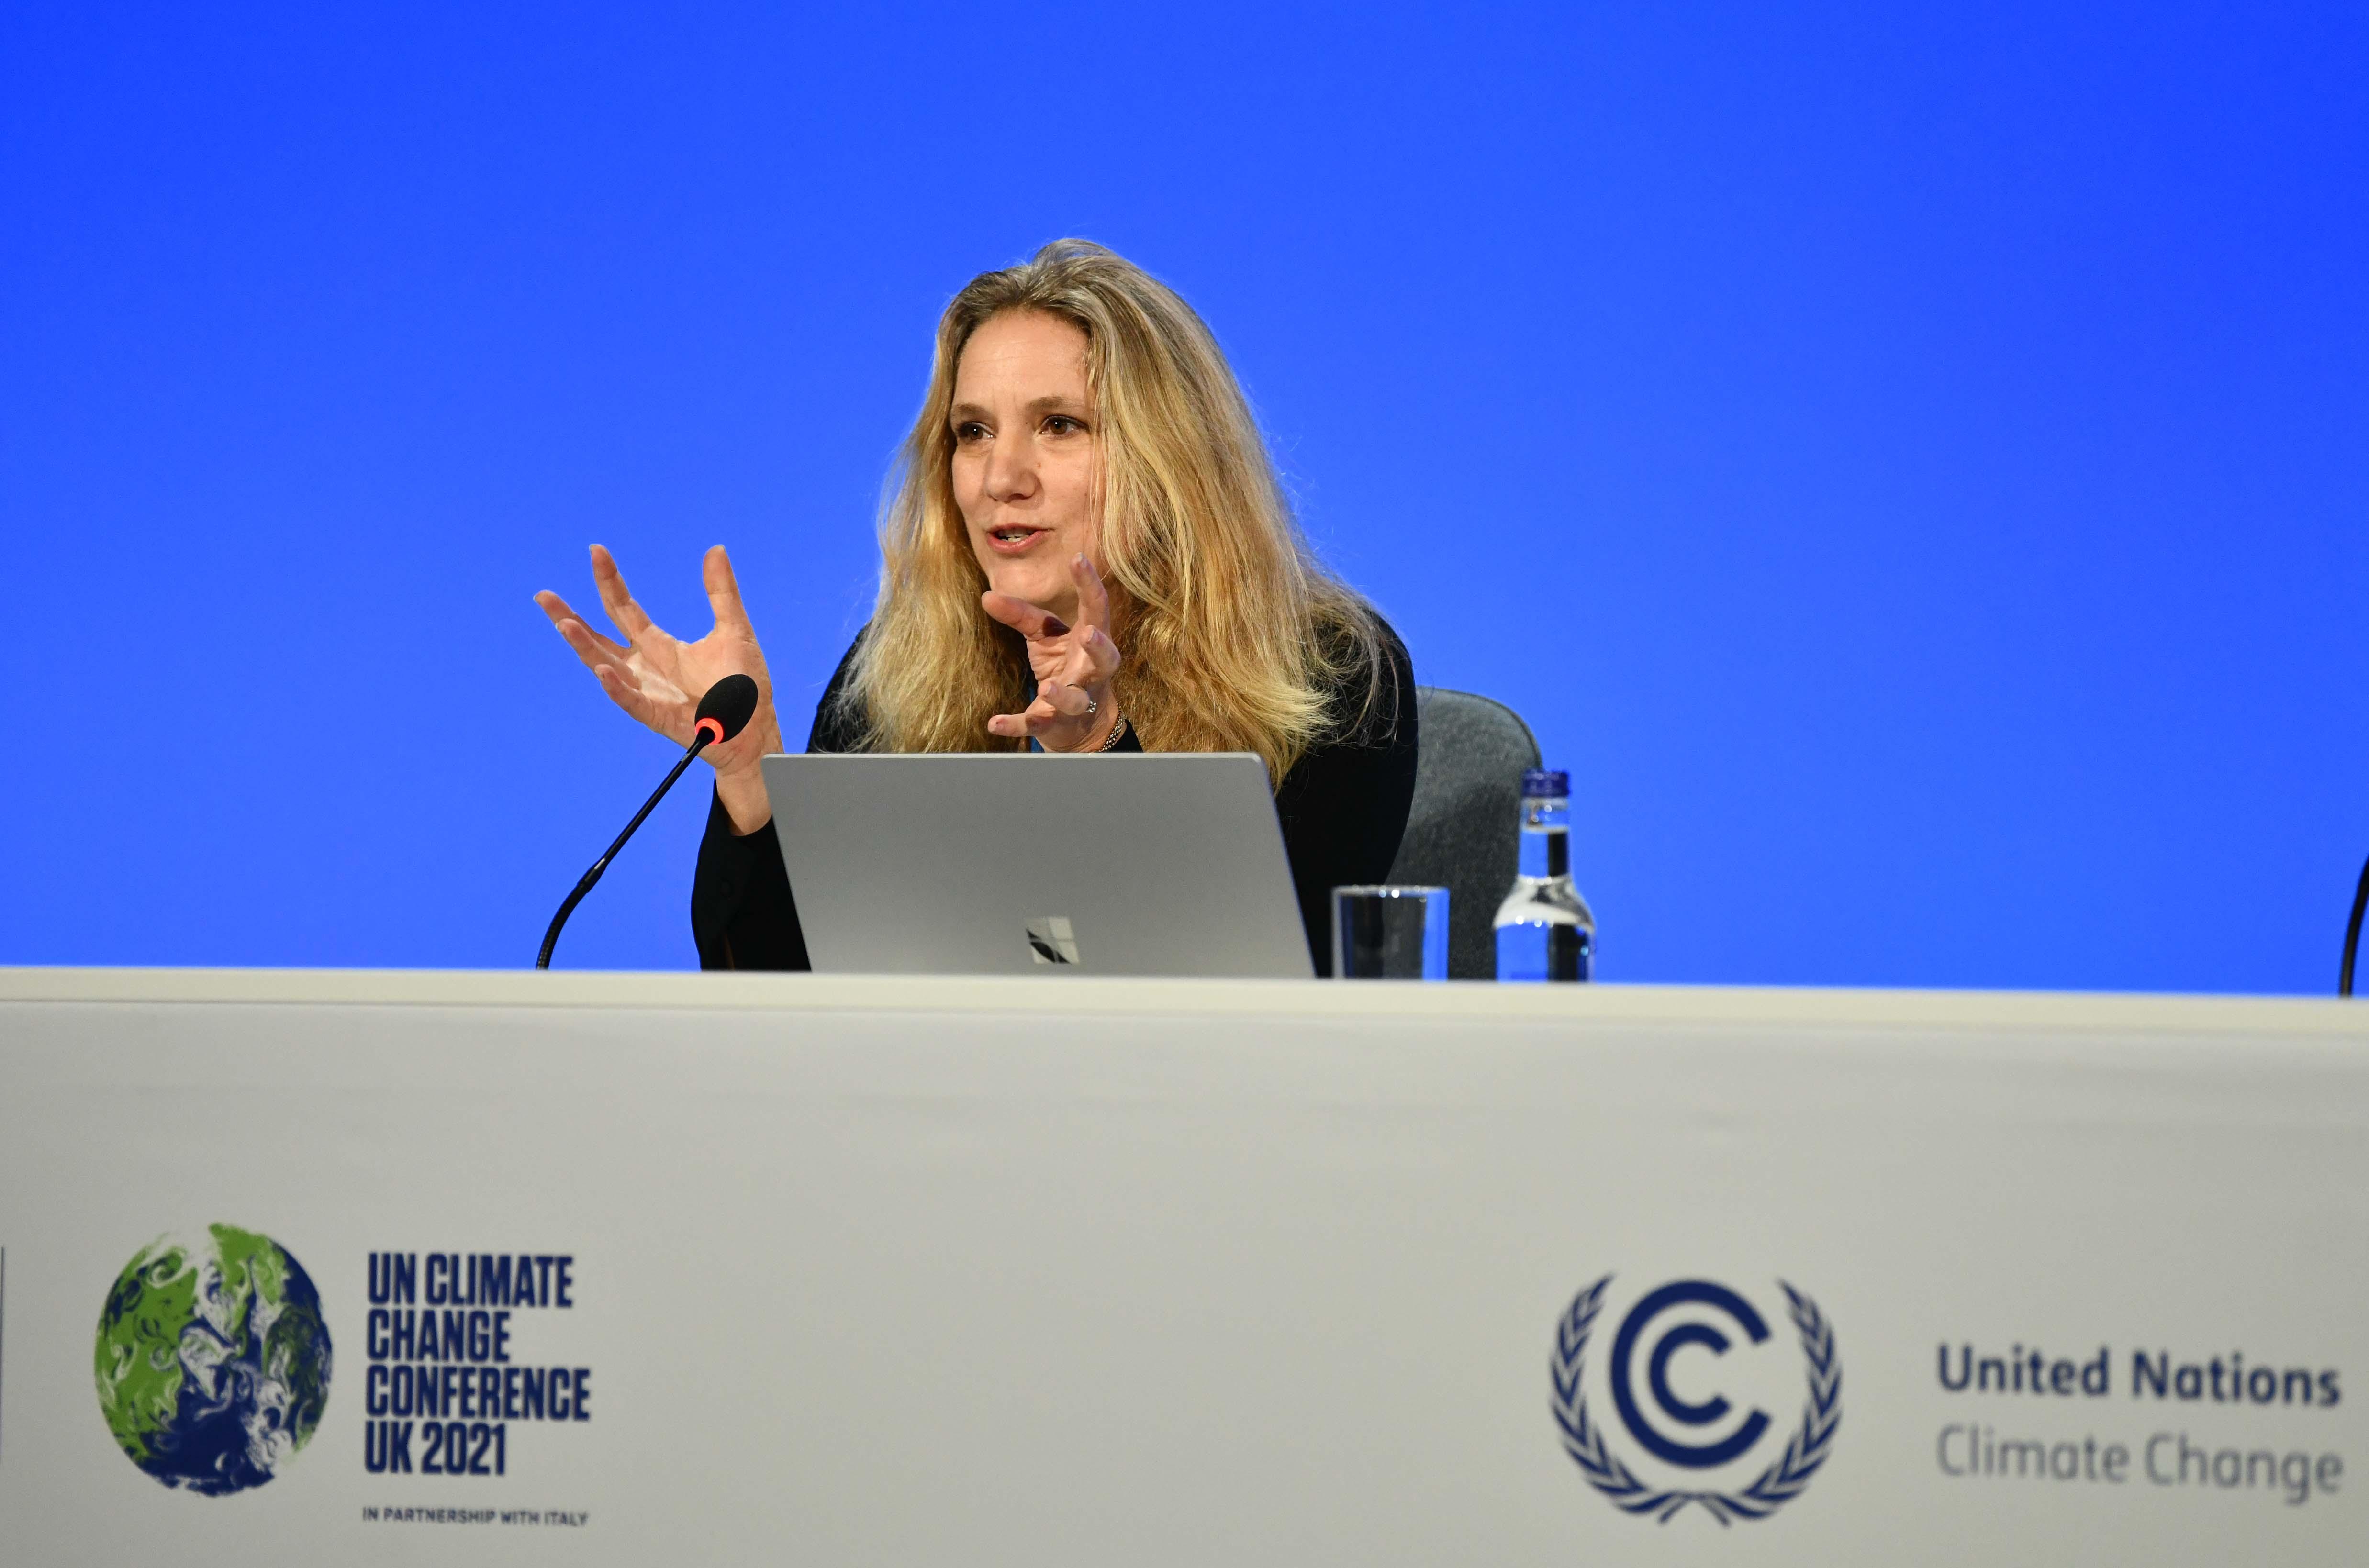 Professor Emily Shuckburgh sits behind her laptop and gestures while speaking on a panel at COP26. The background is white and the table she is sat at is adorned with UN COP26 logos. 